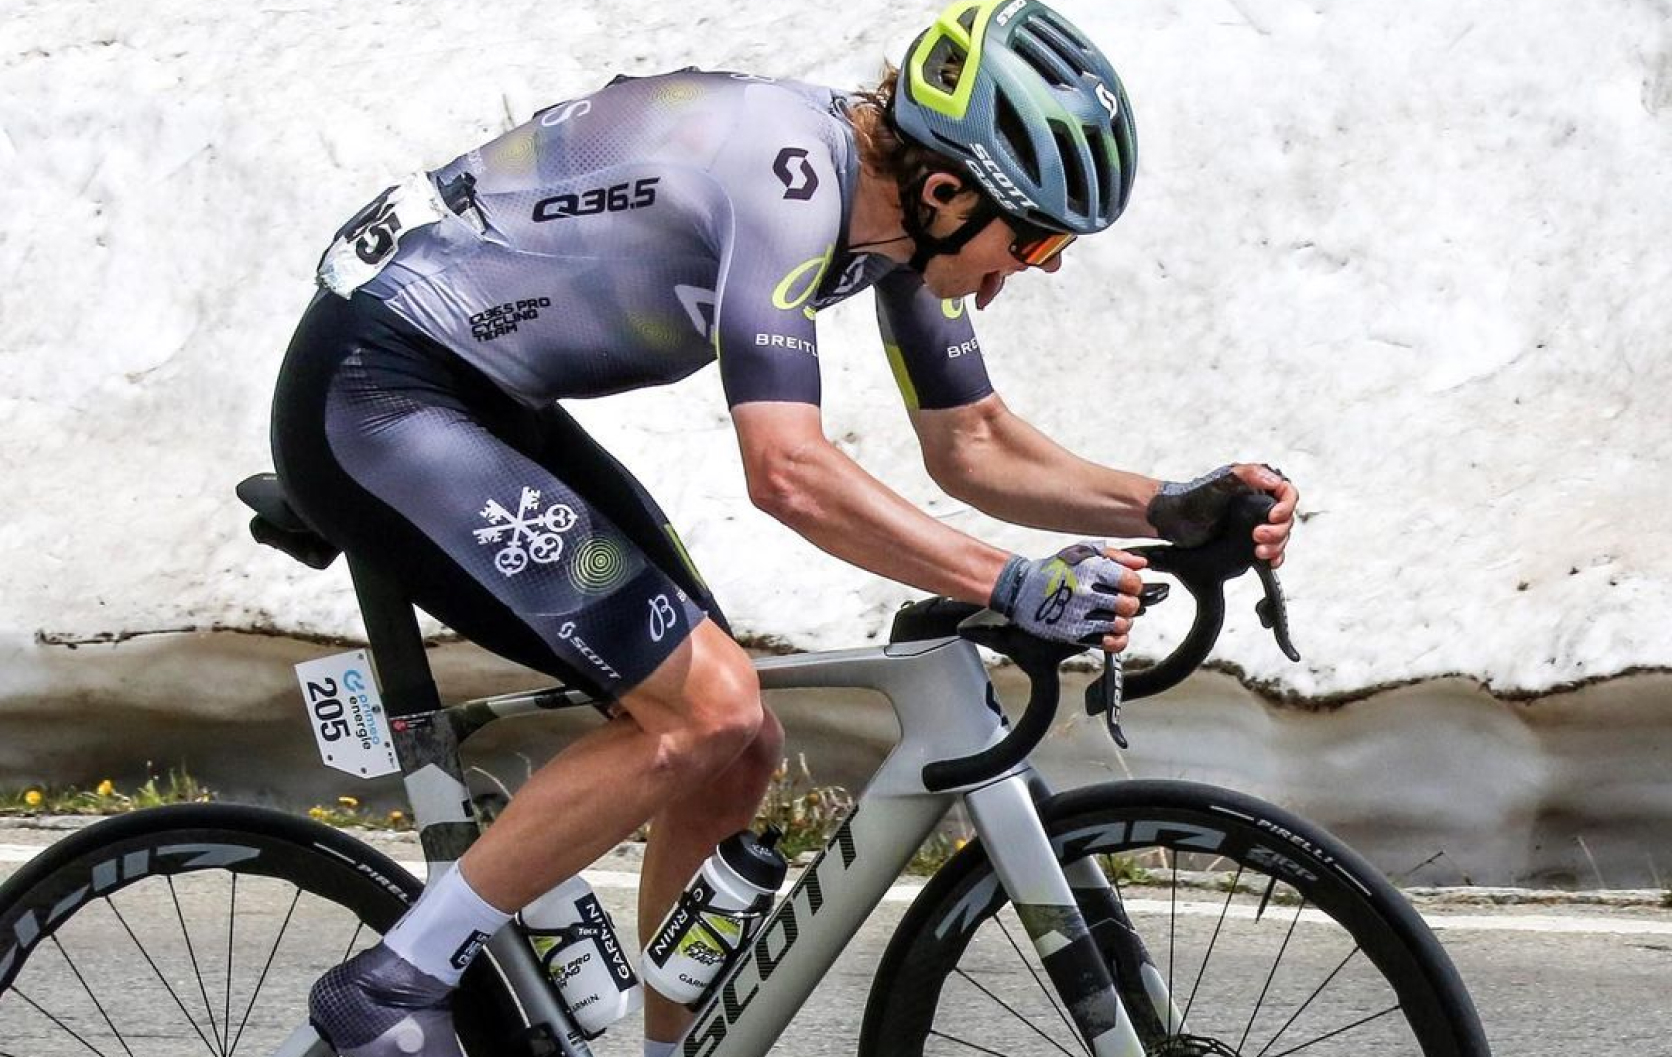 Heat Training by a Pro Cyclist using CORE - Q36.5 Pro Cycling Team